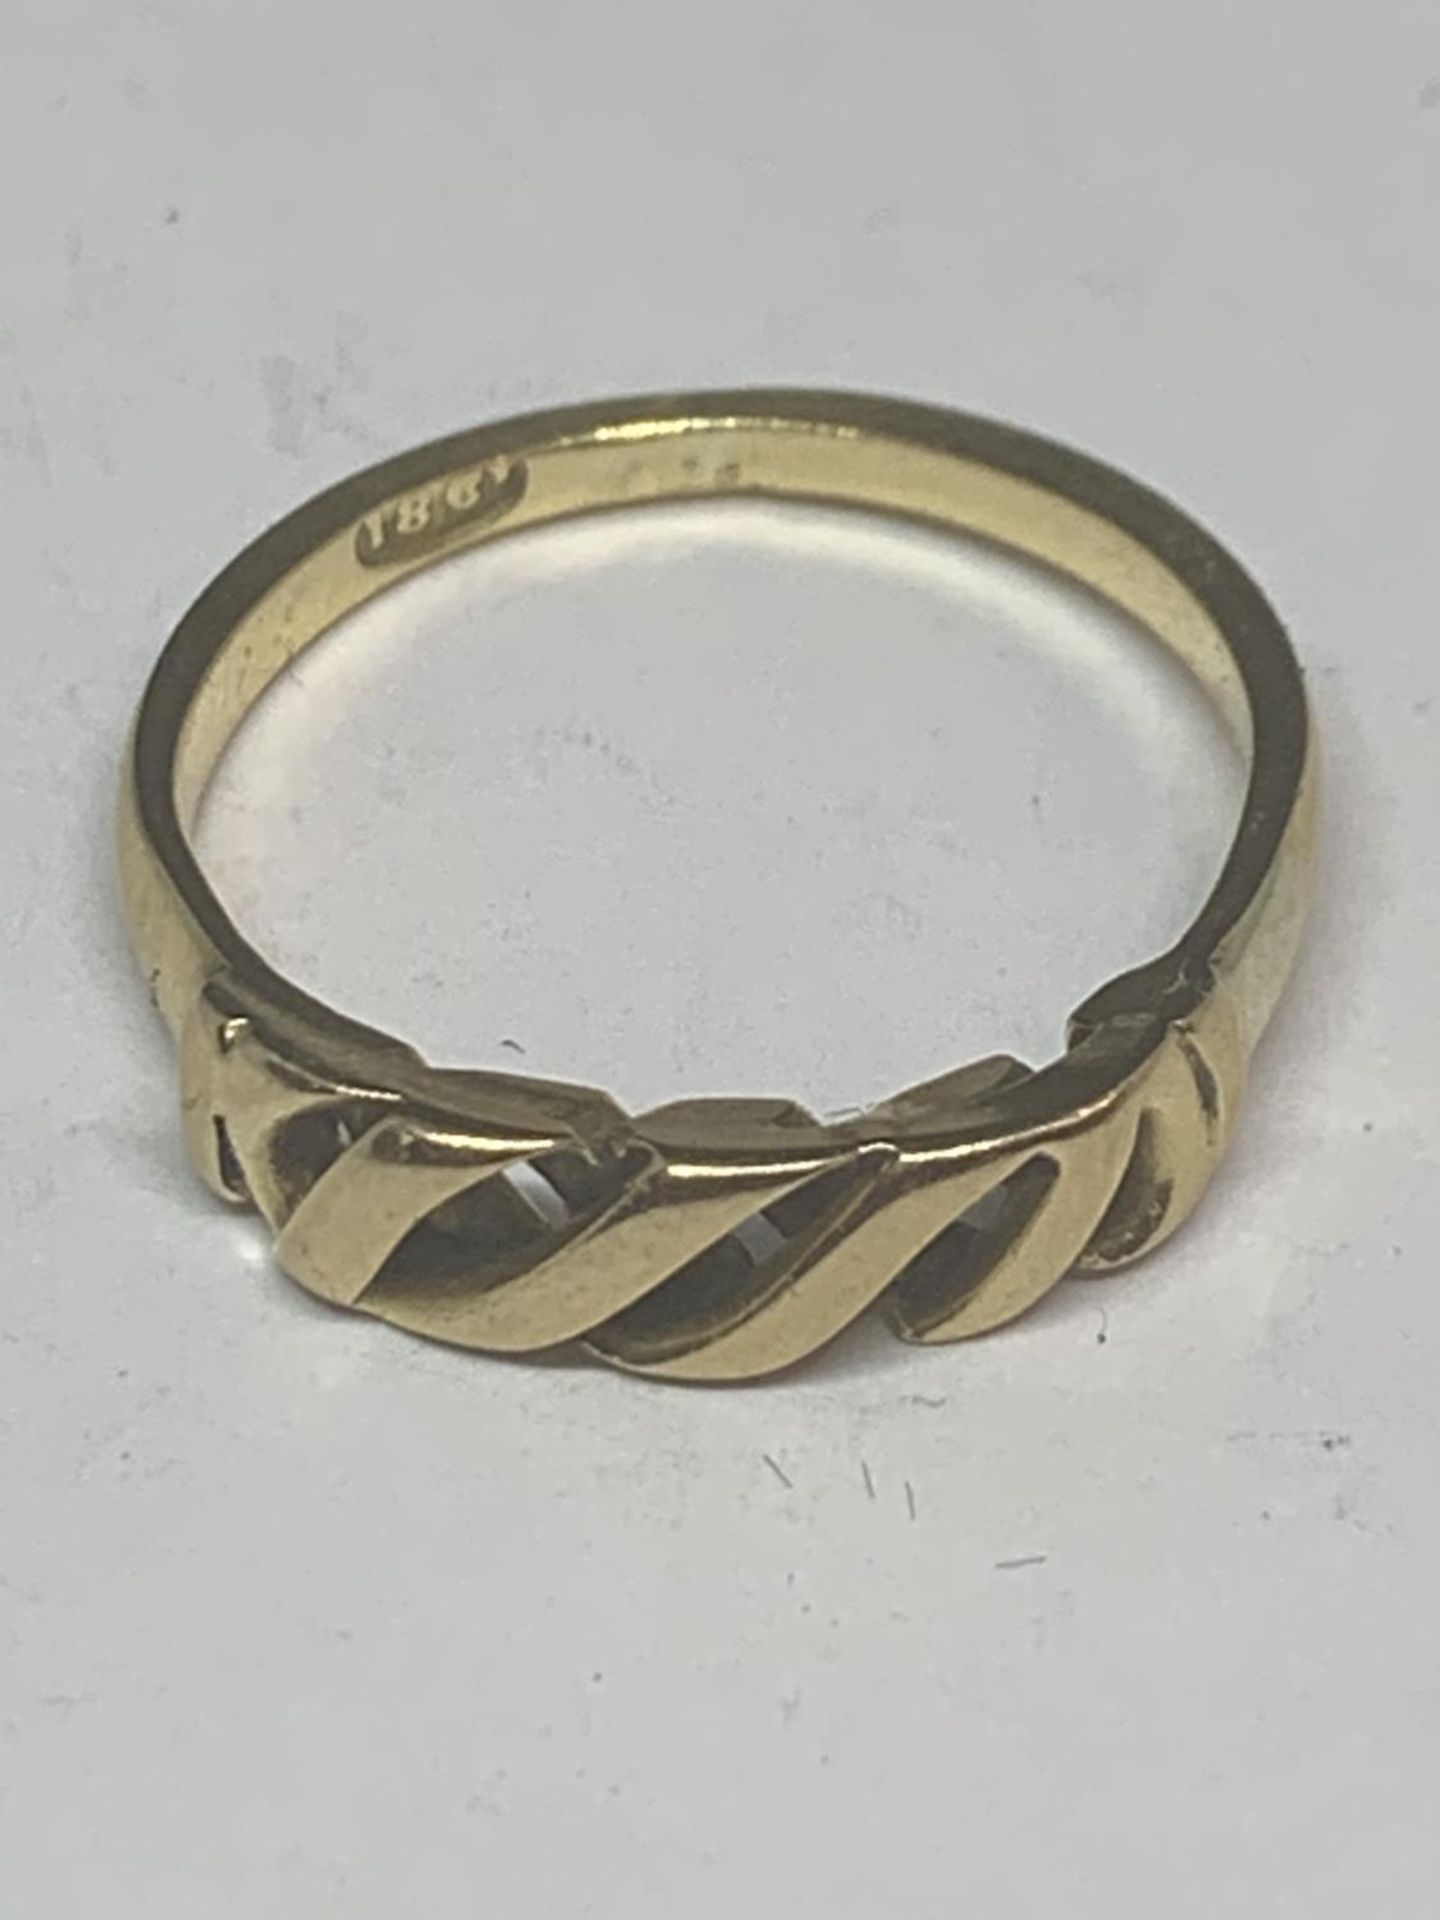 AN 18 CARAT GOLD RING WITH TWIST DESIGN GROSS WEIGHT 3.16 GRAMS SIZE N - Image 2 of 8